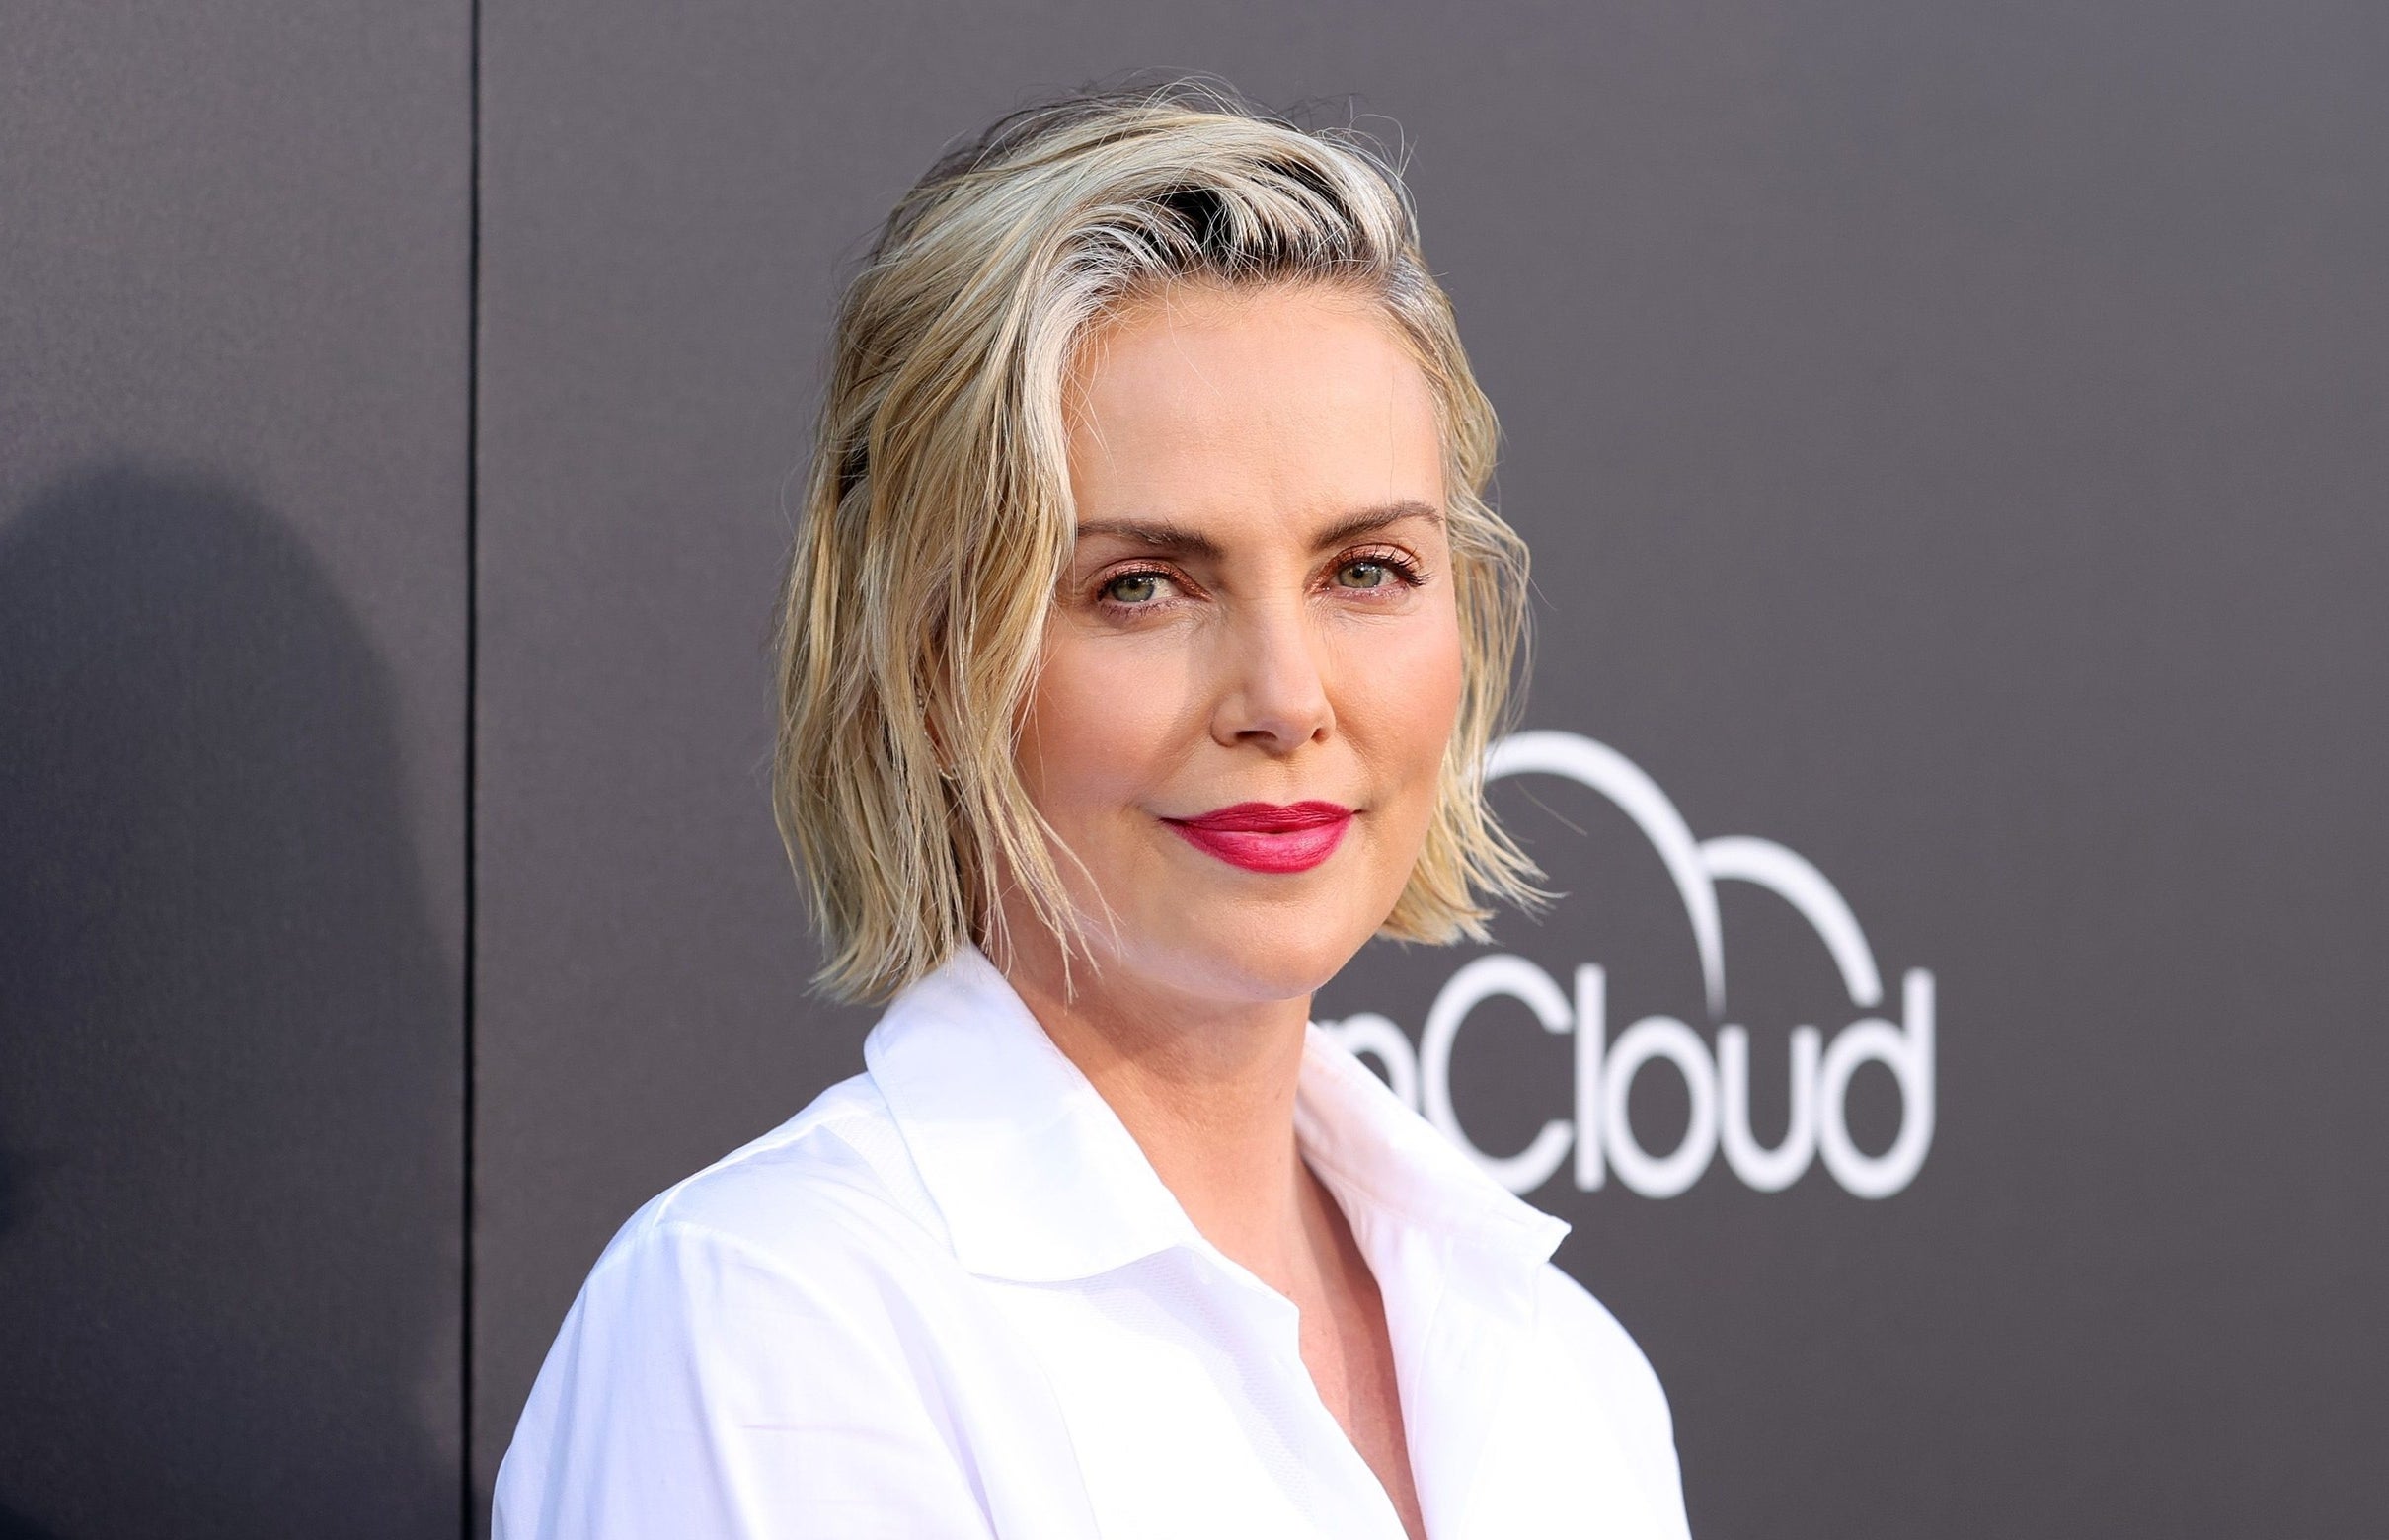 Charlize Theron attending the CTAOP&#x27;s Night Out event